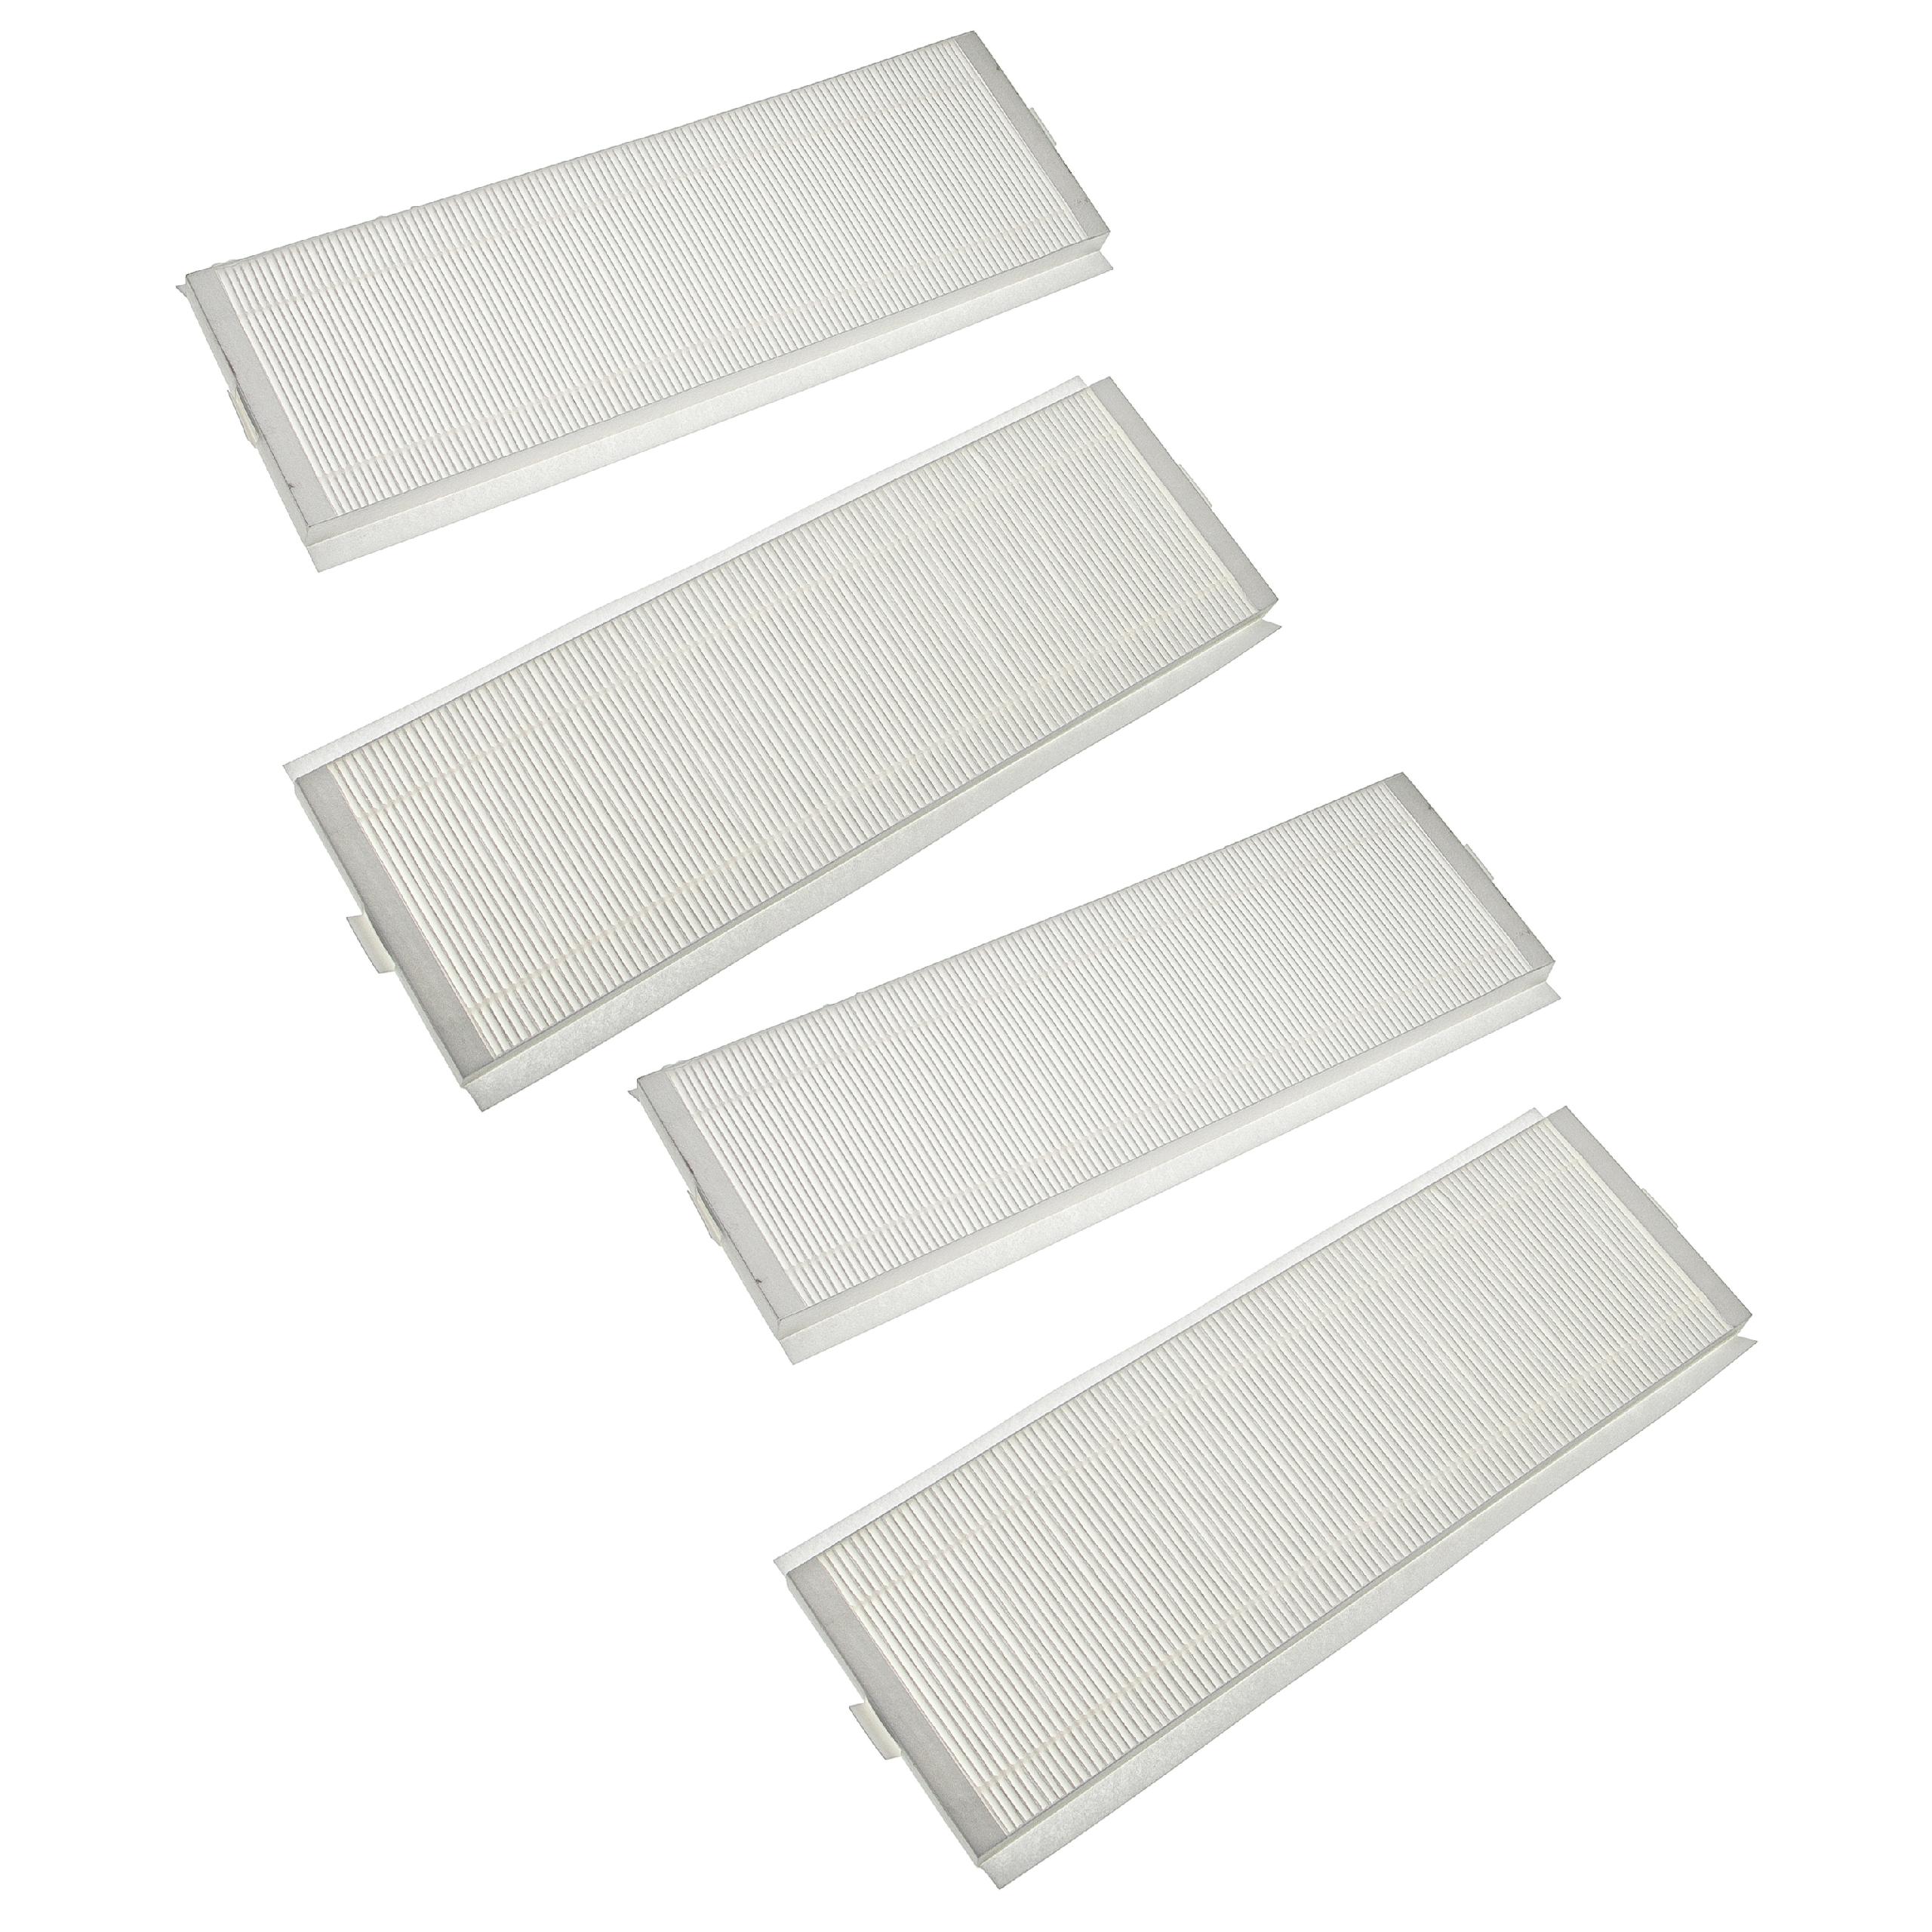 Air Filter Set Replacement for Zehnder 400502013 for Ventilation Devices - G4 / F7 4-Part Kit